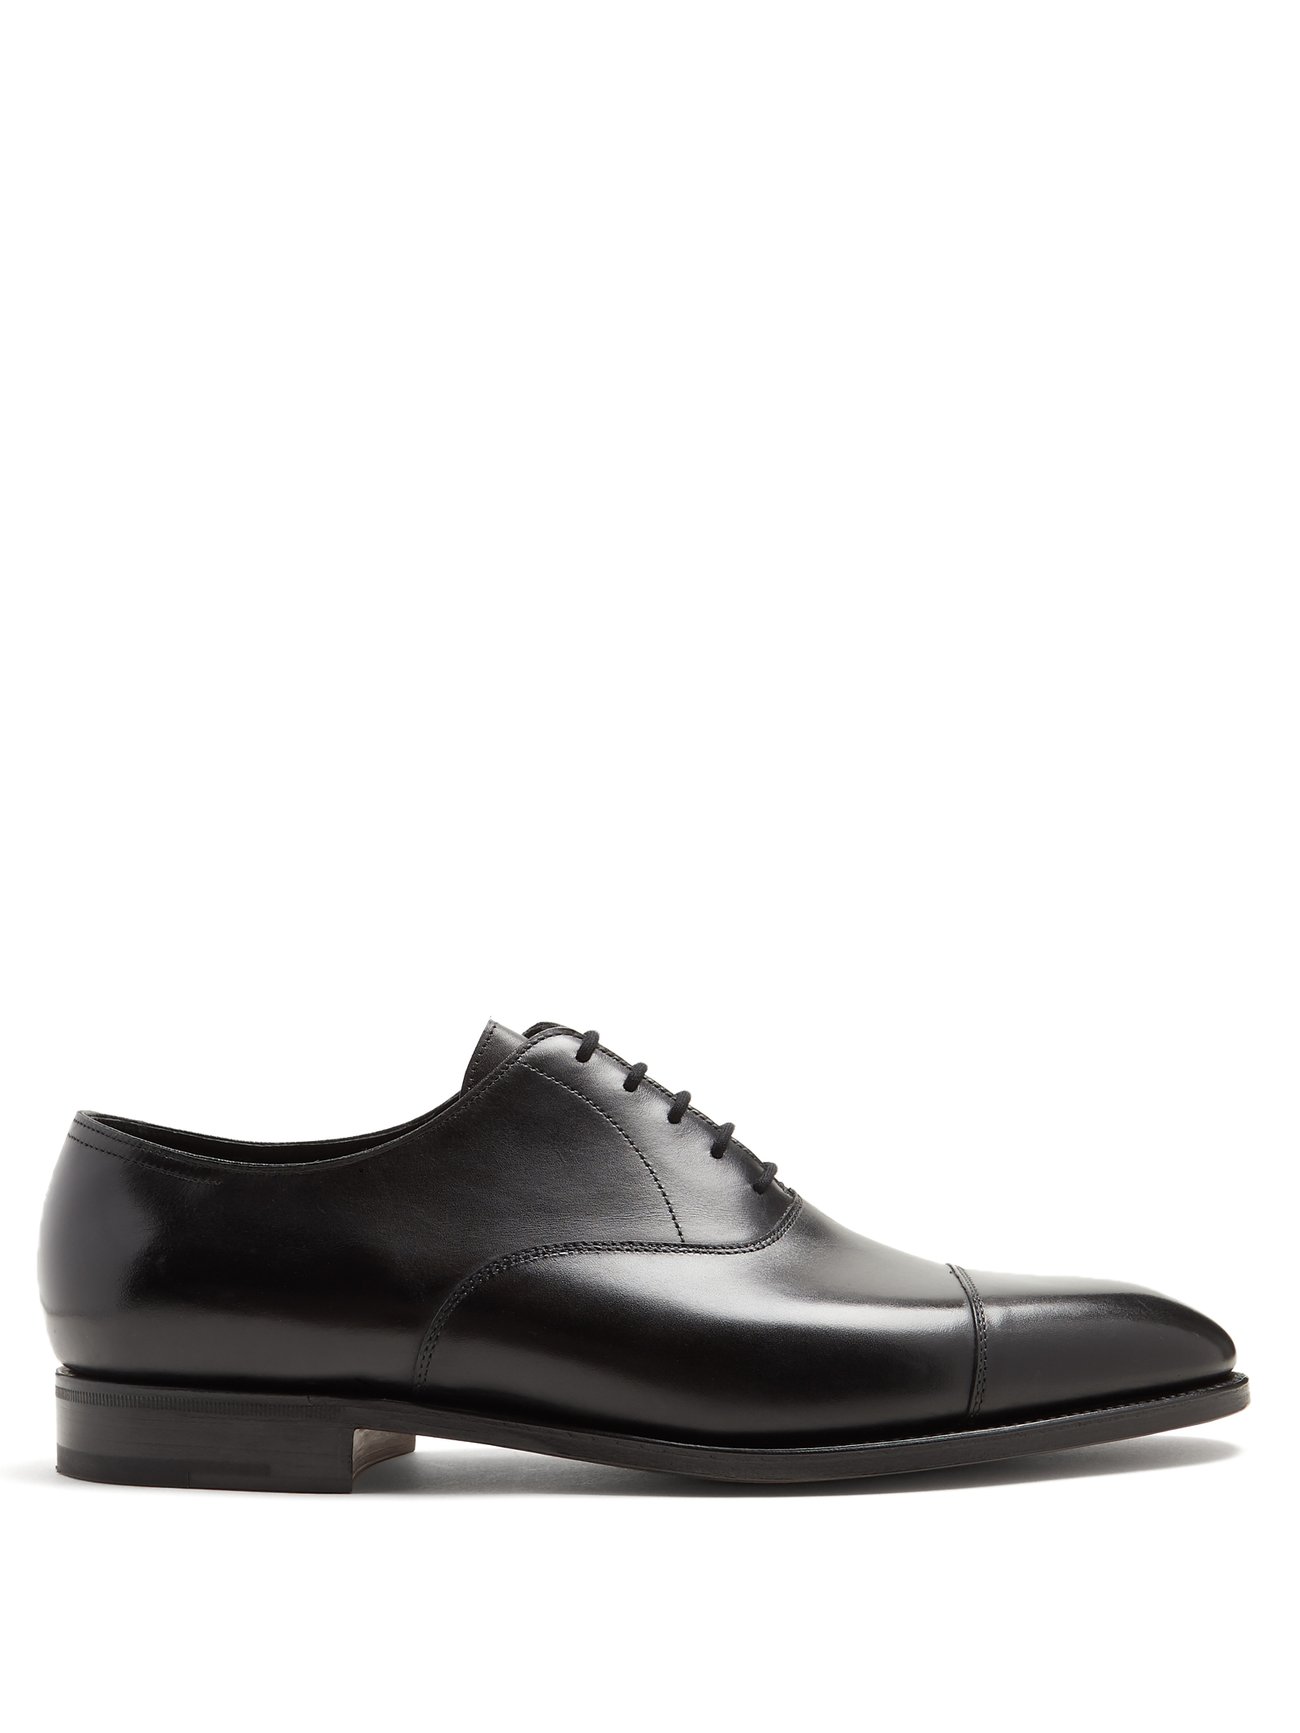 City II leather oxford shoes